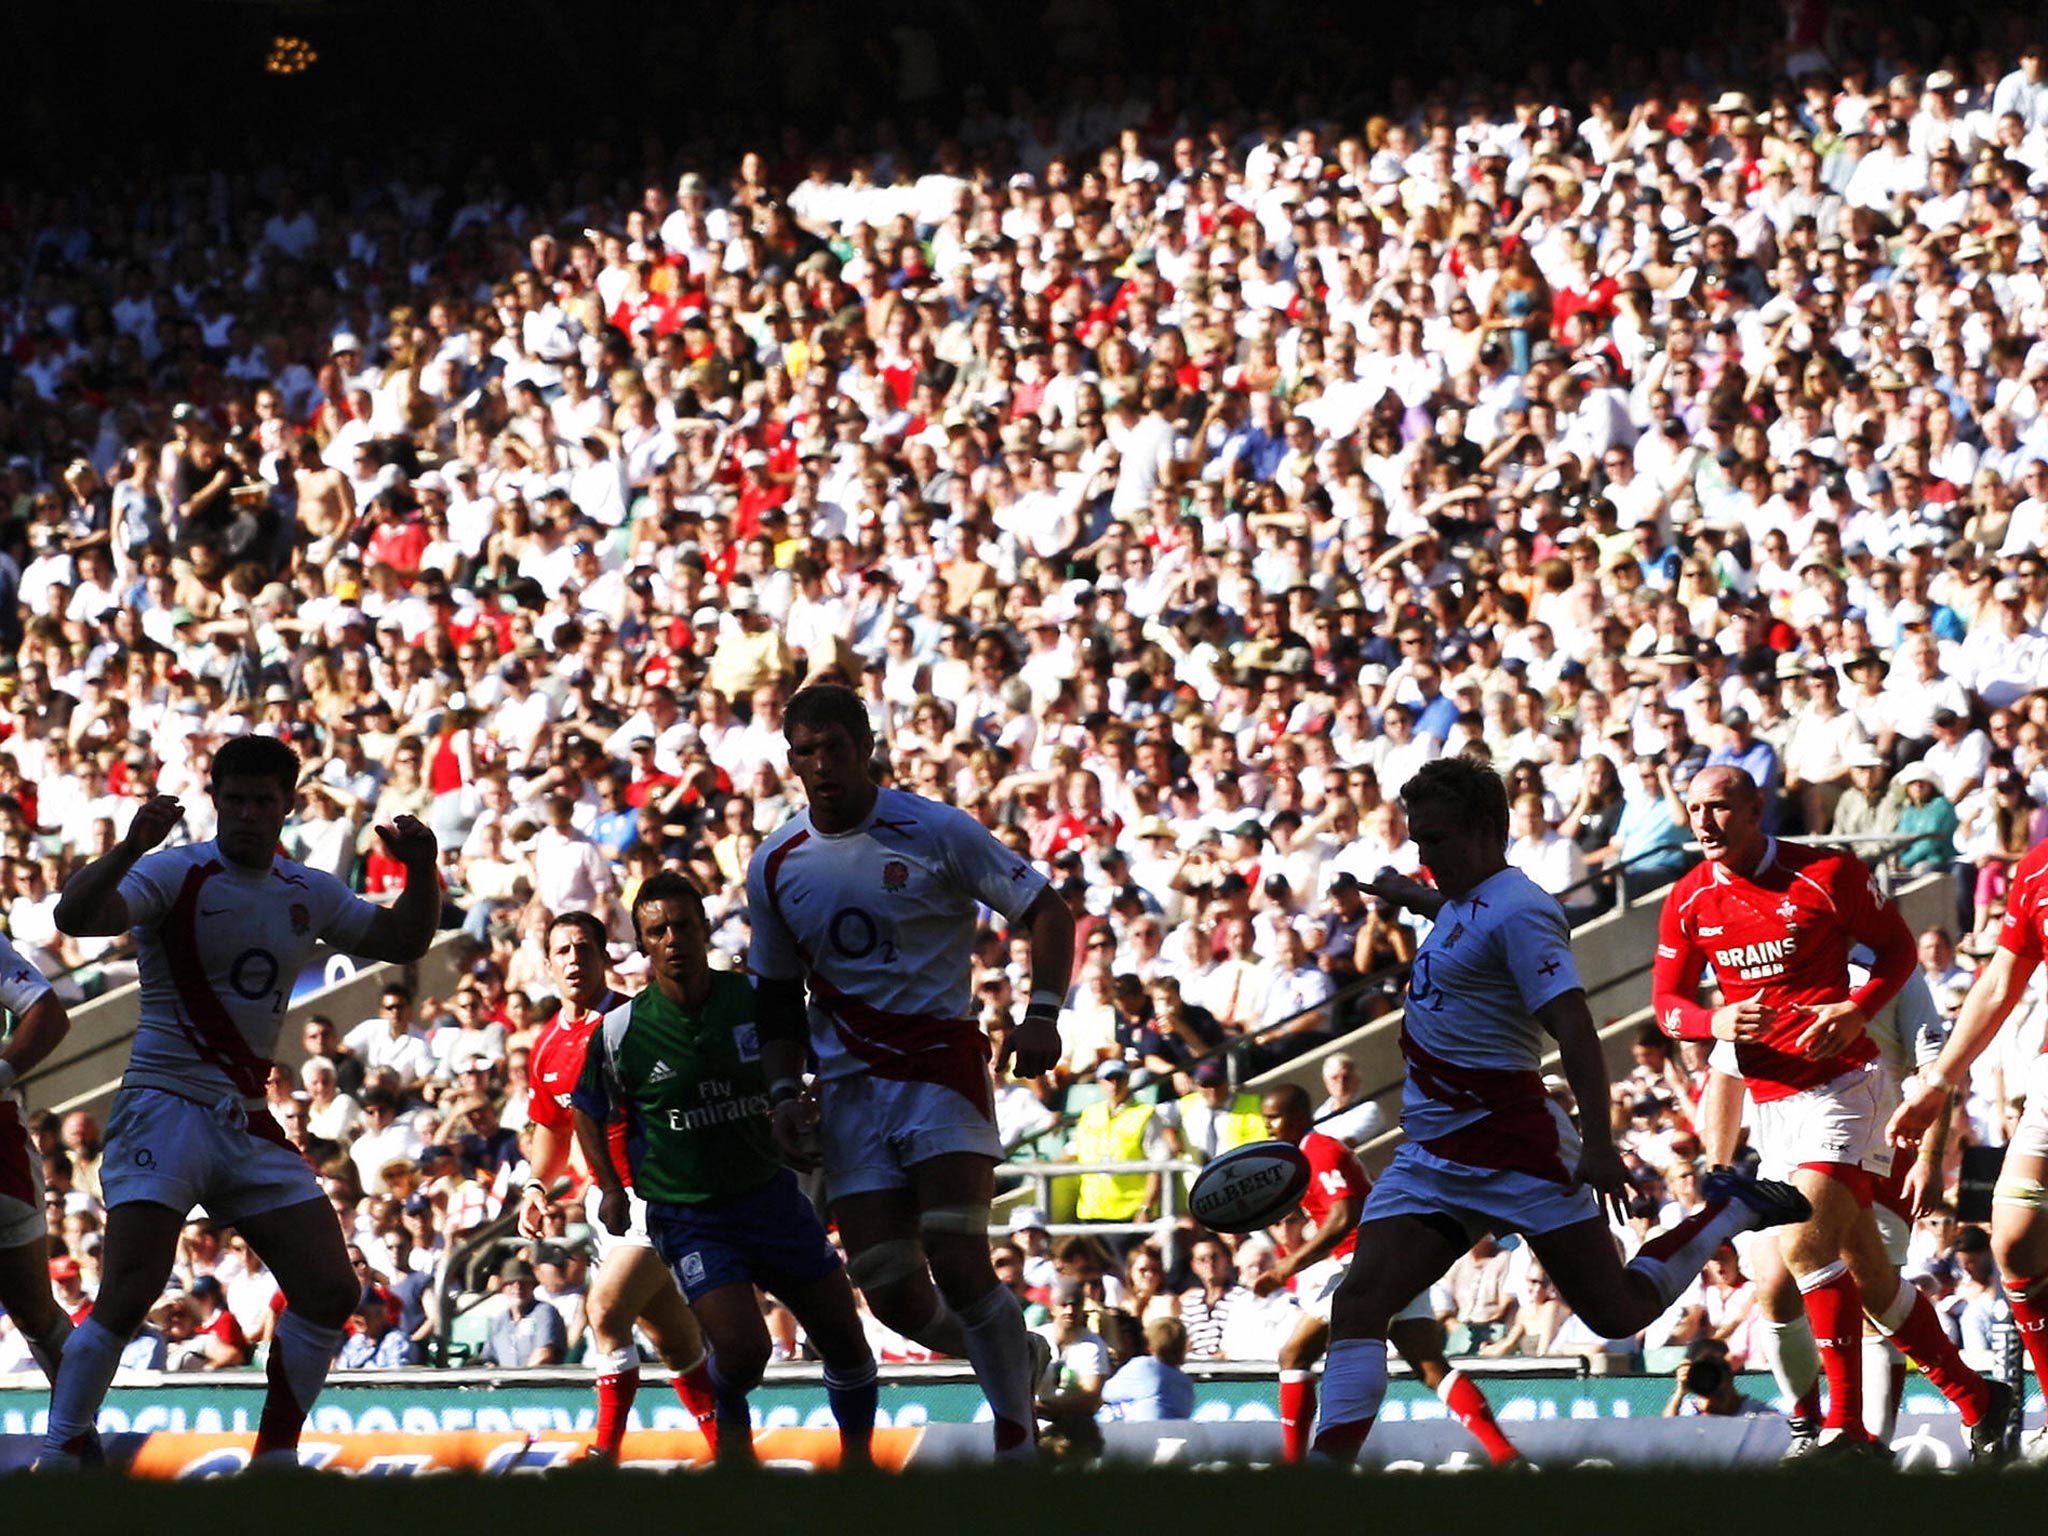 England beat Wales 62-5 in a 2007 World Cup warm-up game